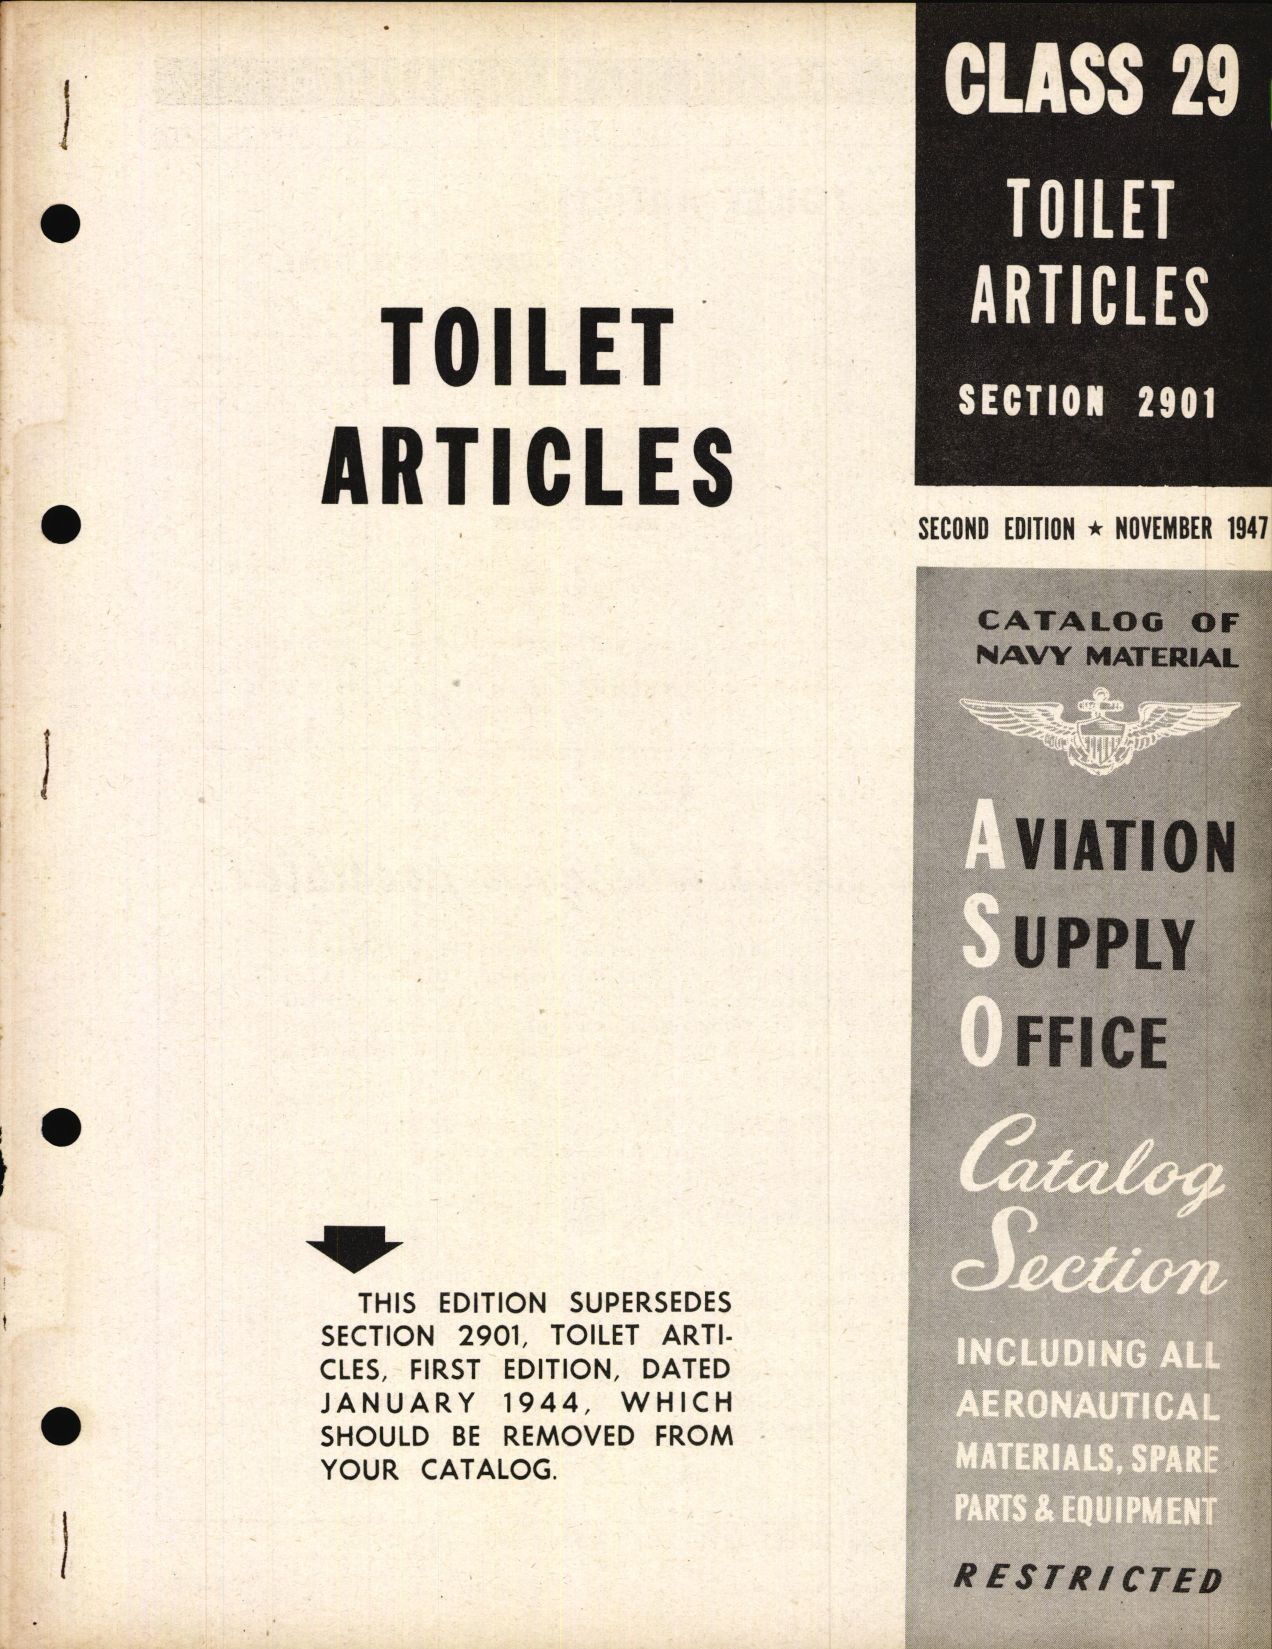 Sample page 1 from AirCorps Library document: Toilet Articles